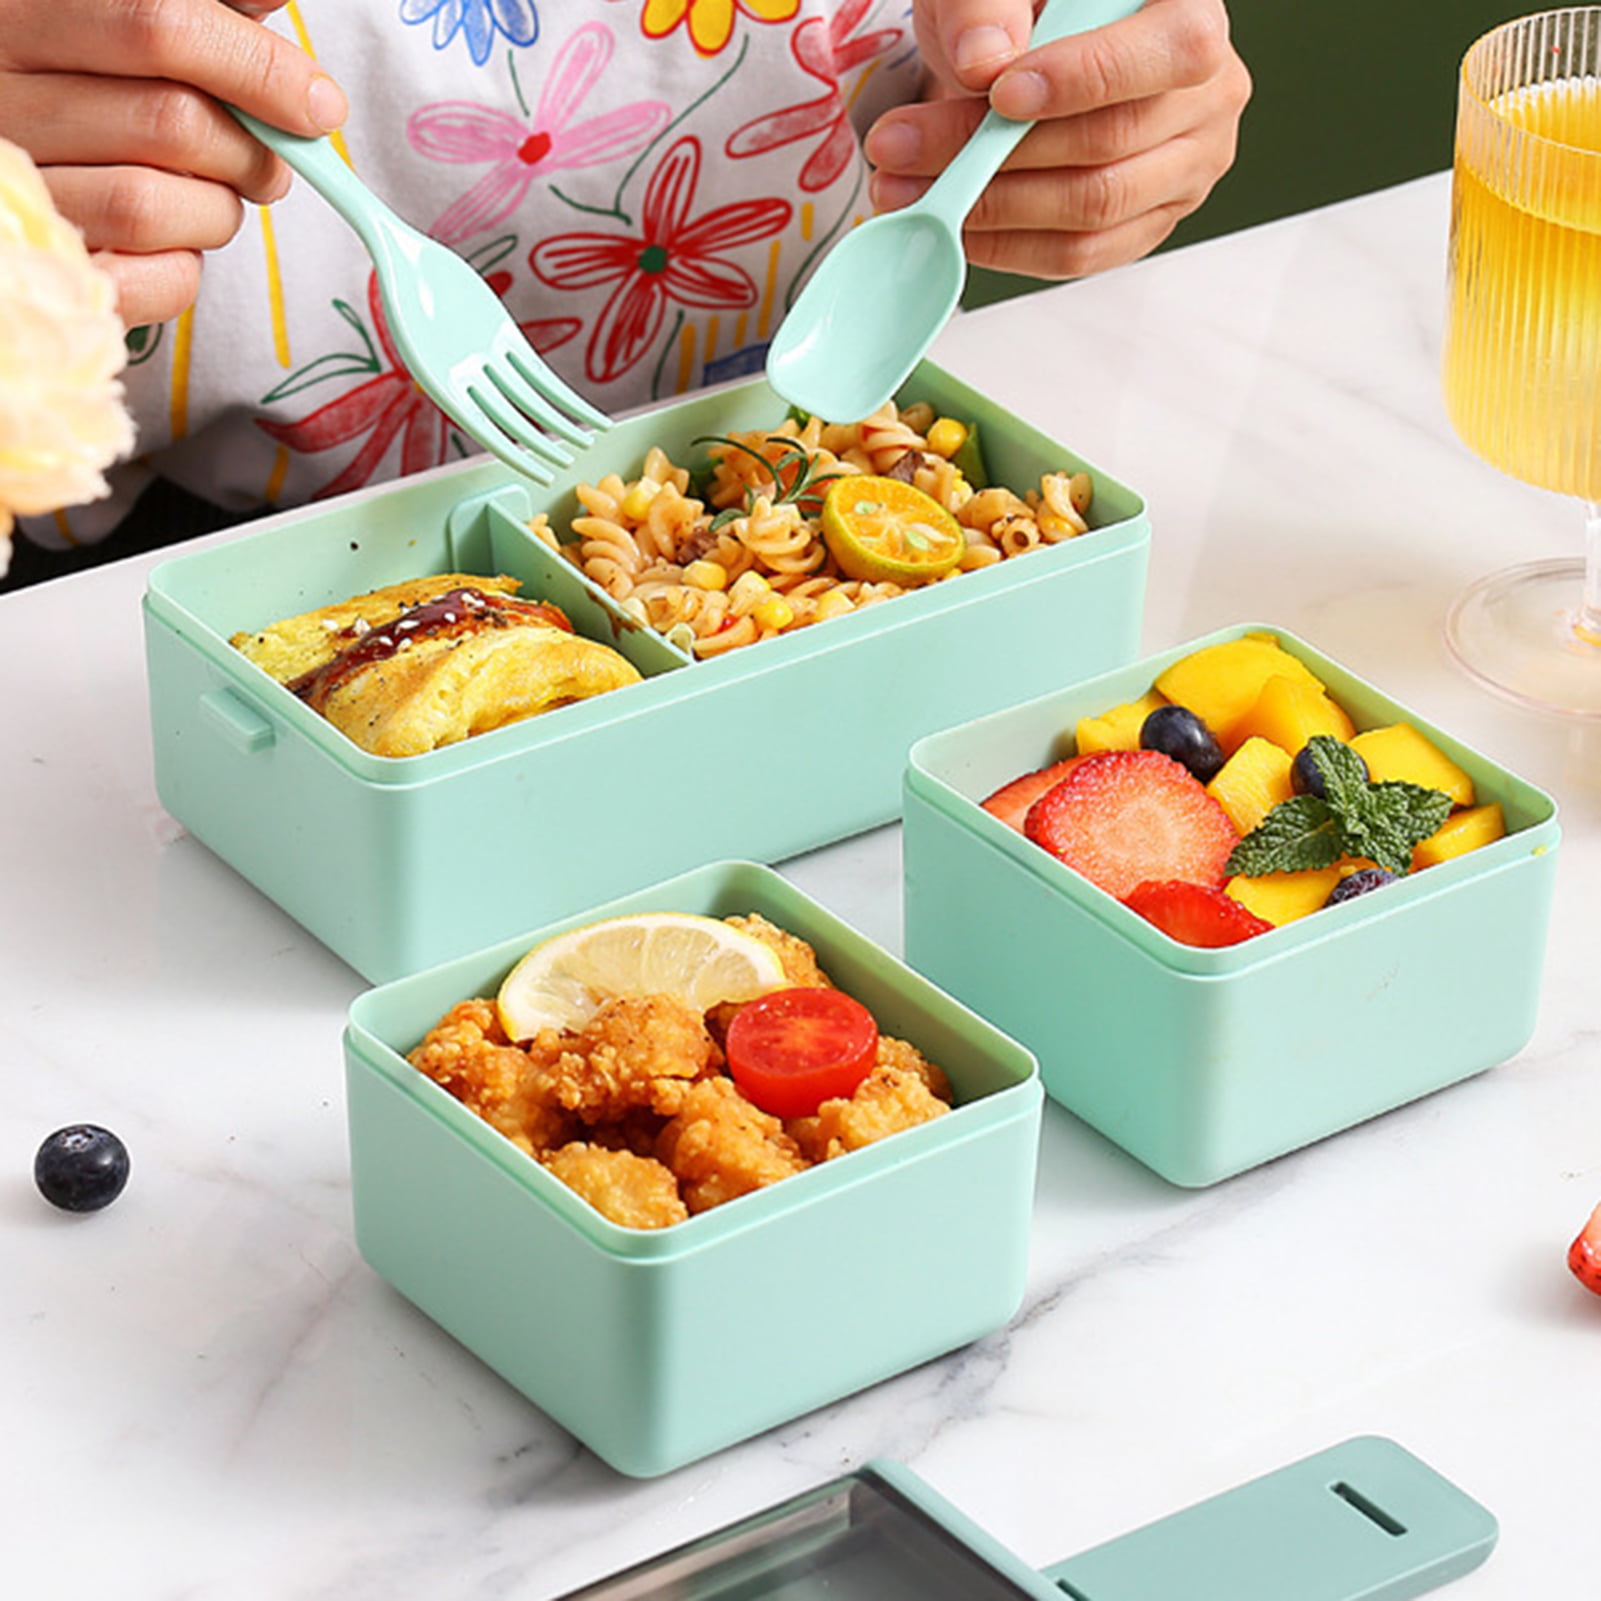 JAYEEY 37 OZ 4 Compartments disposable plates with Lids lunch box bento box  Eco-friendly Plant Fibers Microwave & Freezer Safe 25 PACK